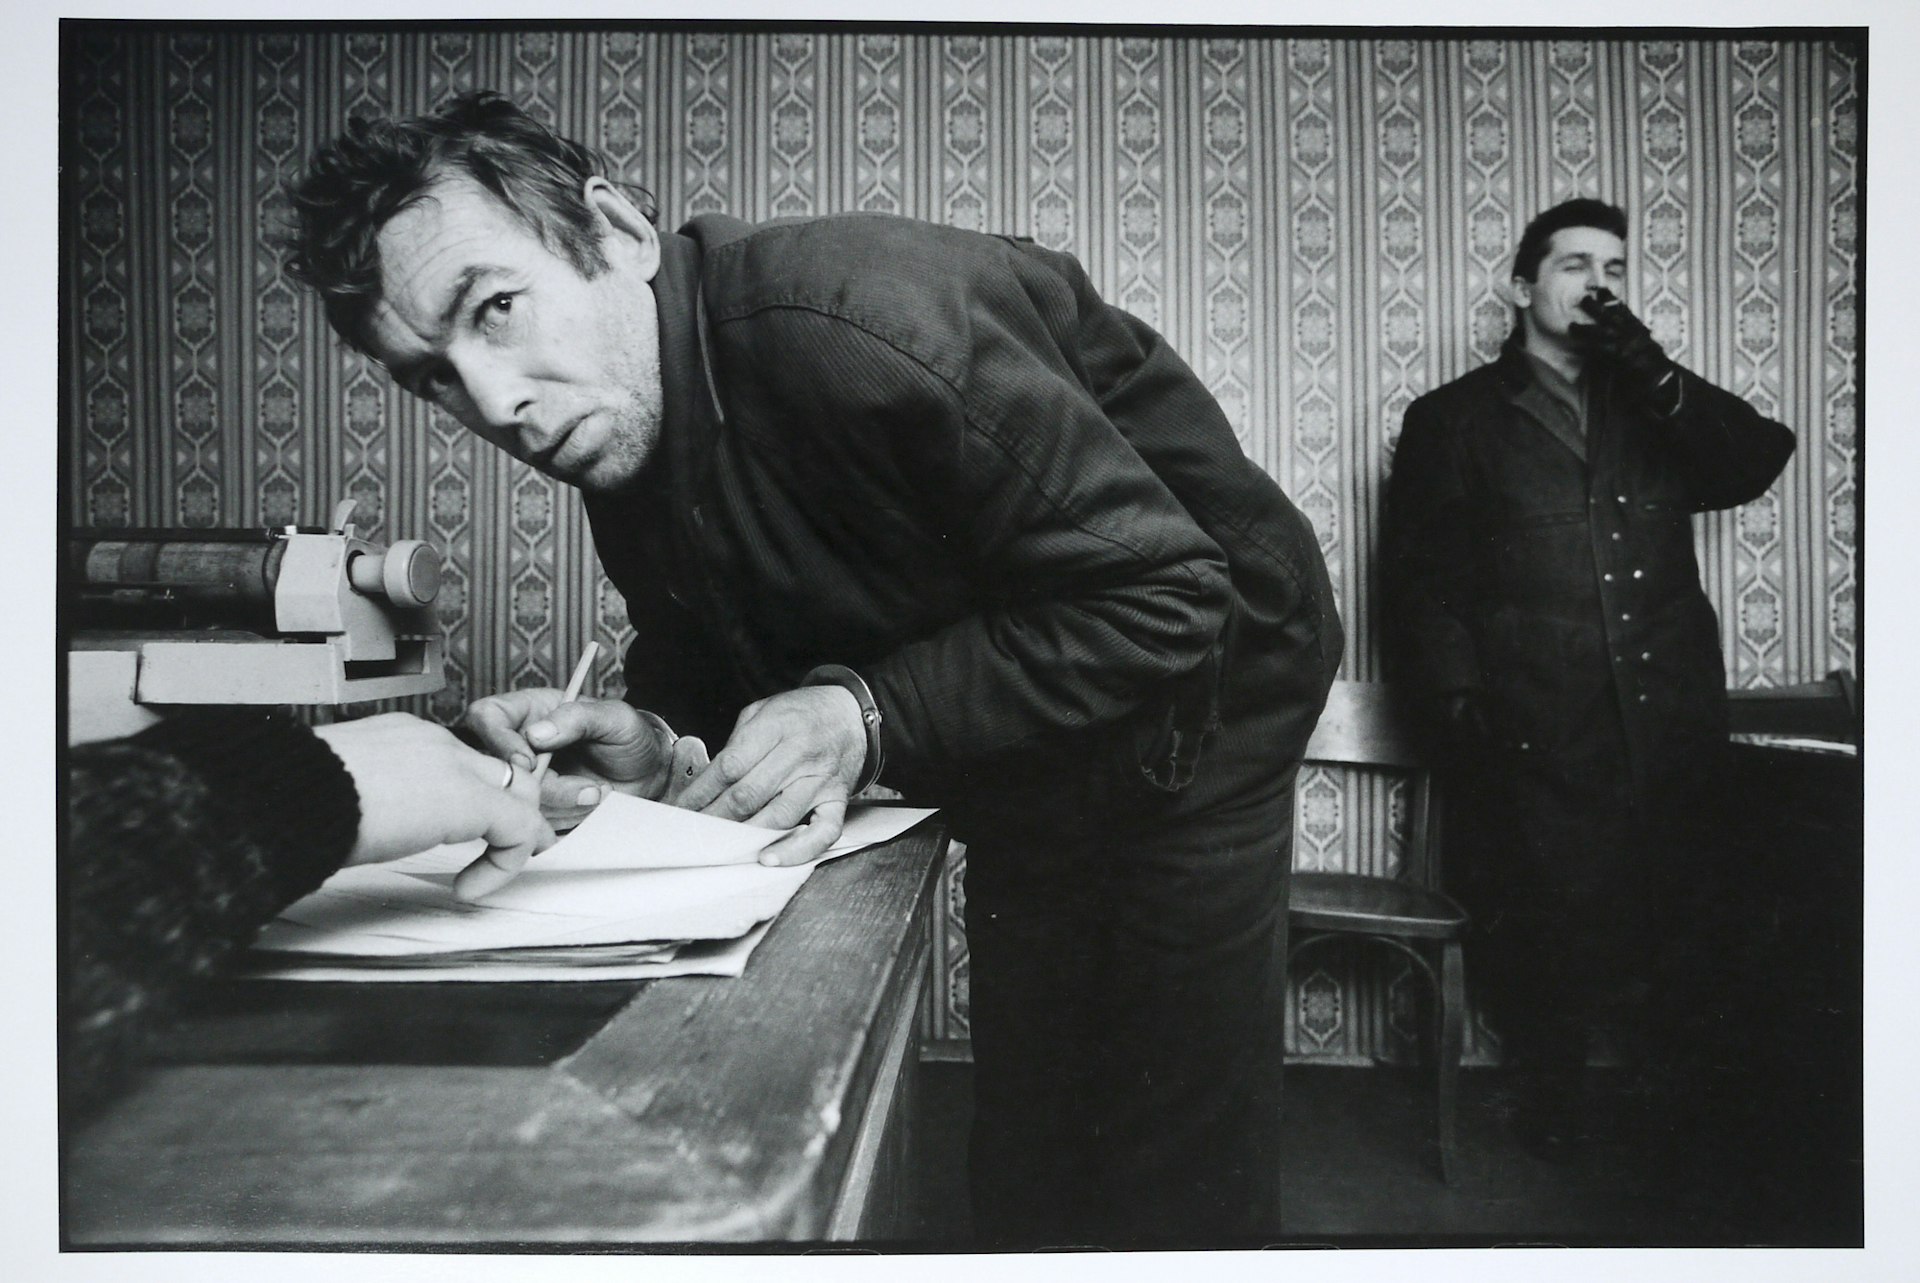 A petty thief signing his confession at the local police station. The arresting officer stands in the background, December 1992.